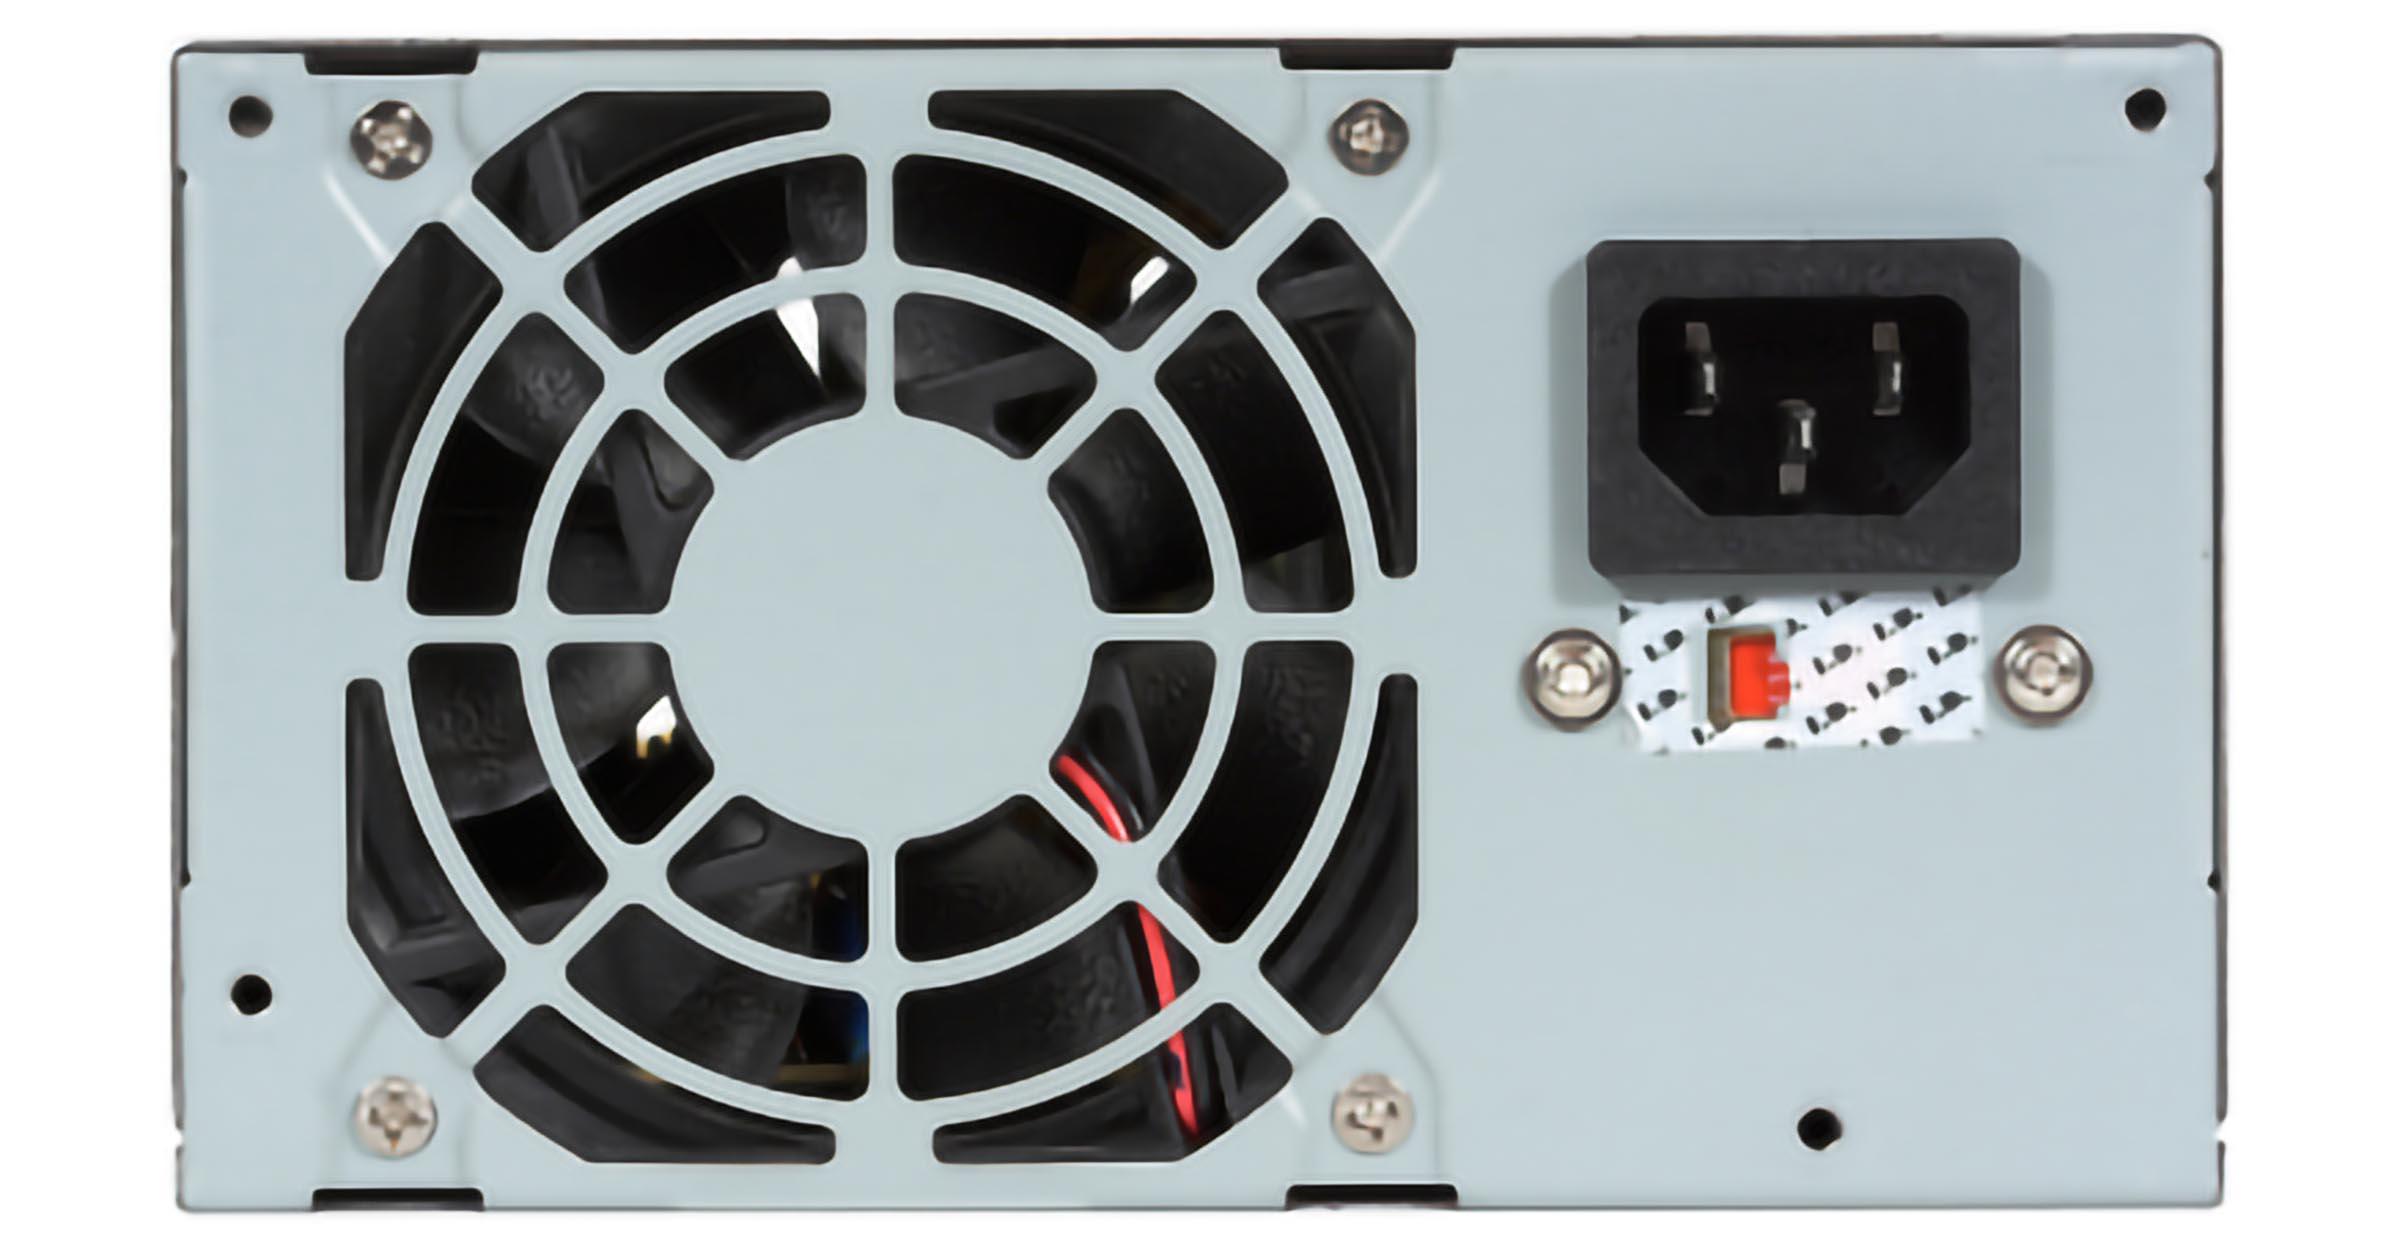 How to Check Power Supply Wattage and Find the Right PSU For Your Needs